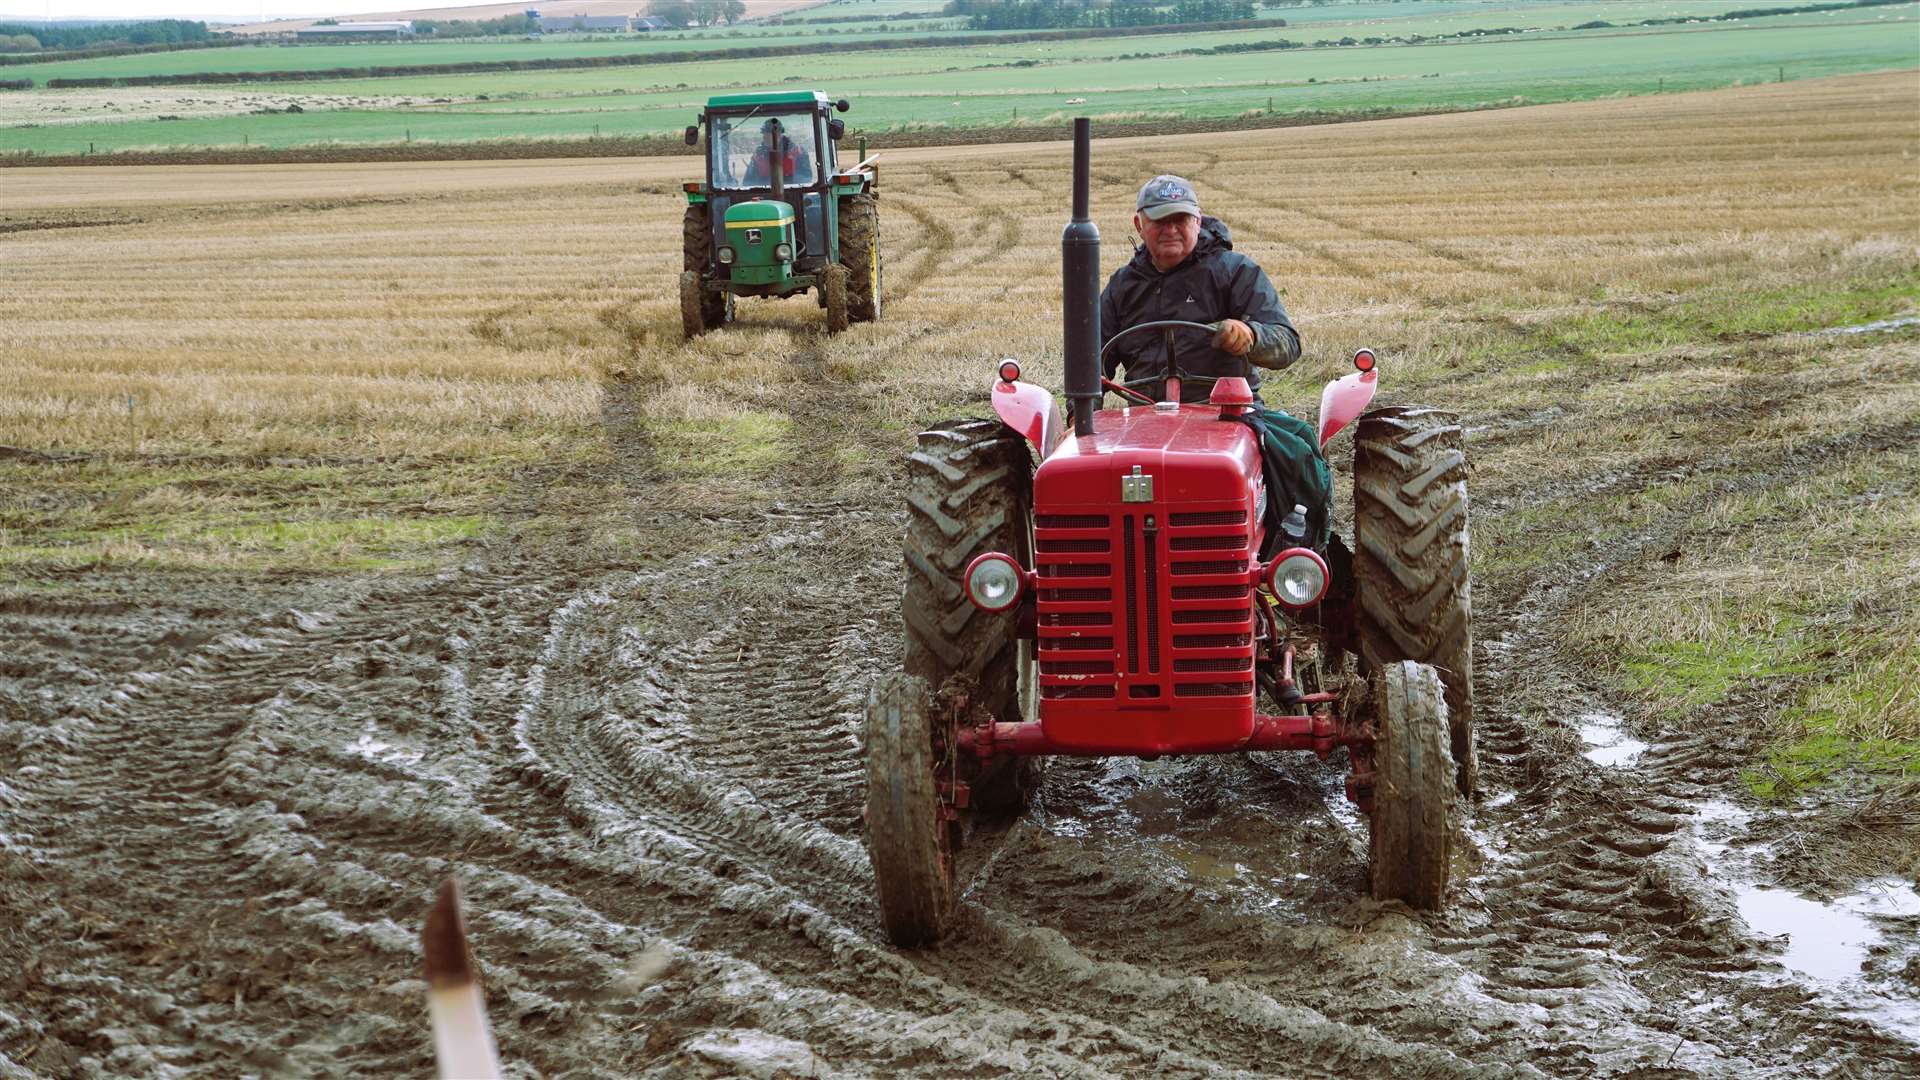 Leaving the field at last year's ploughing match are Jonnie Mathieson on the red tractor at front followed by Robbie Flett on his John Deere. Picture: DGS